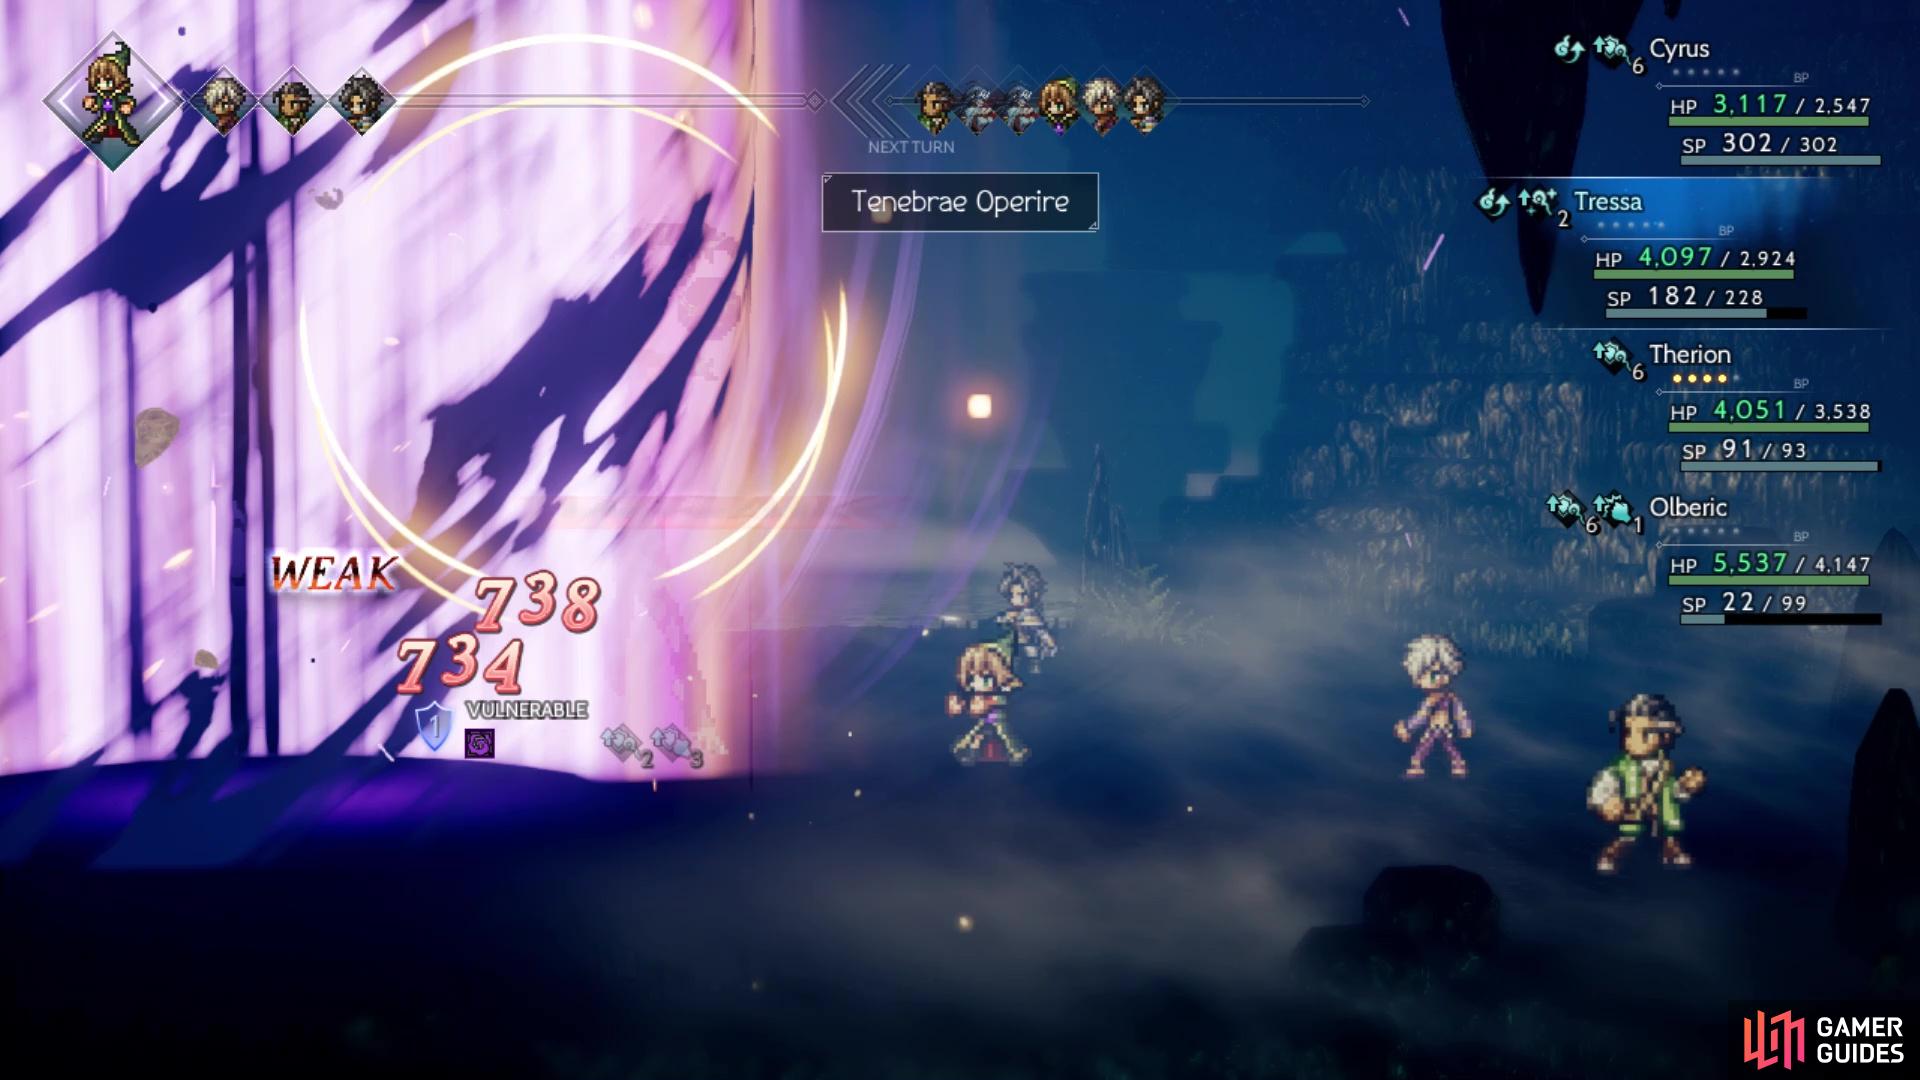 The Sorcerer’s Tenebrae Operire will make the dark-only weakness phase a lot easier to break